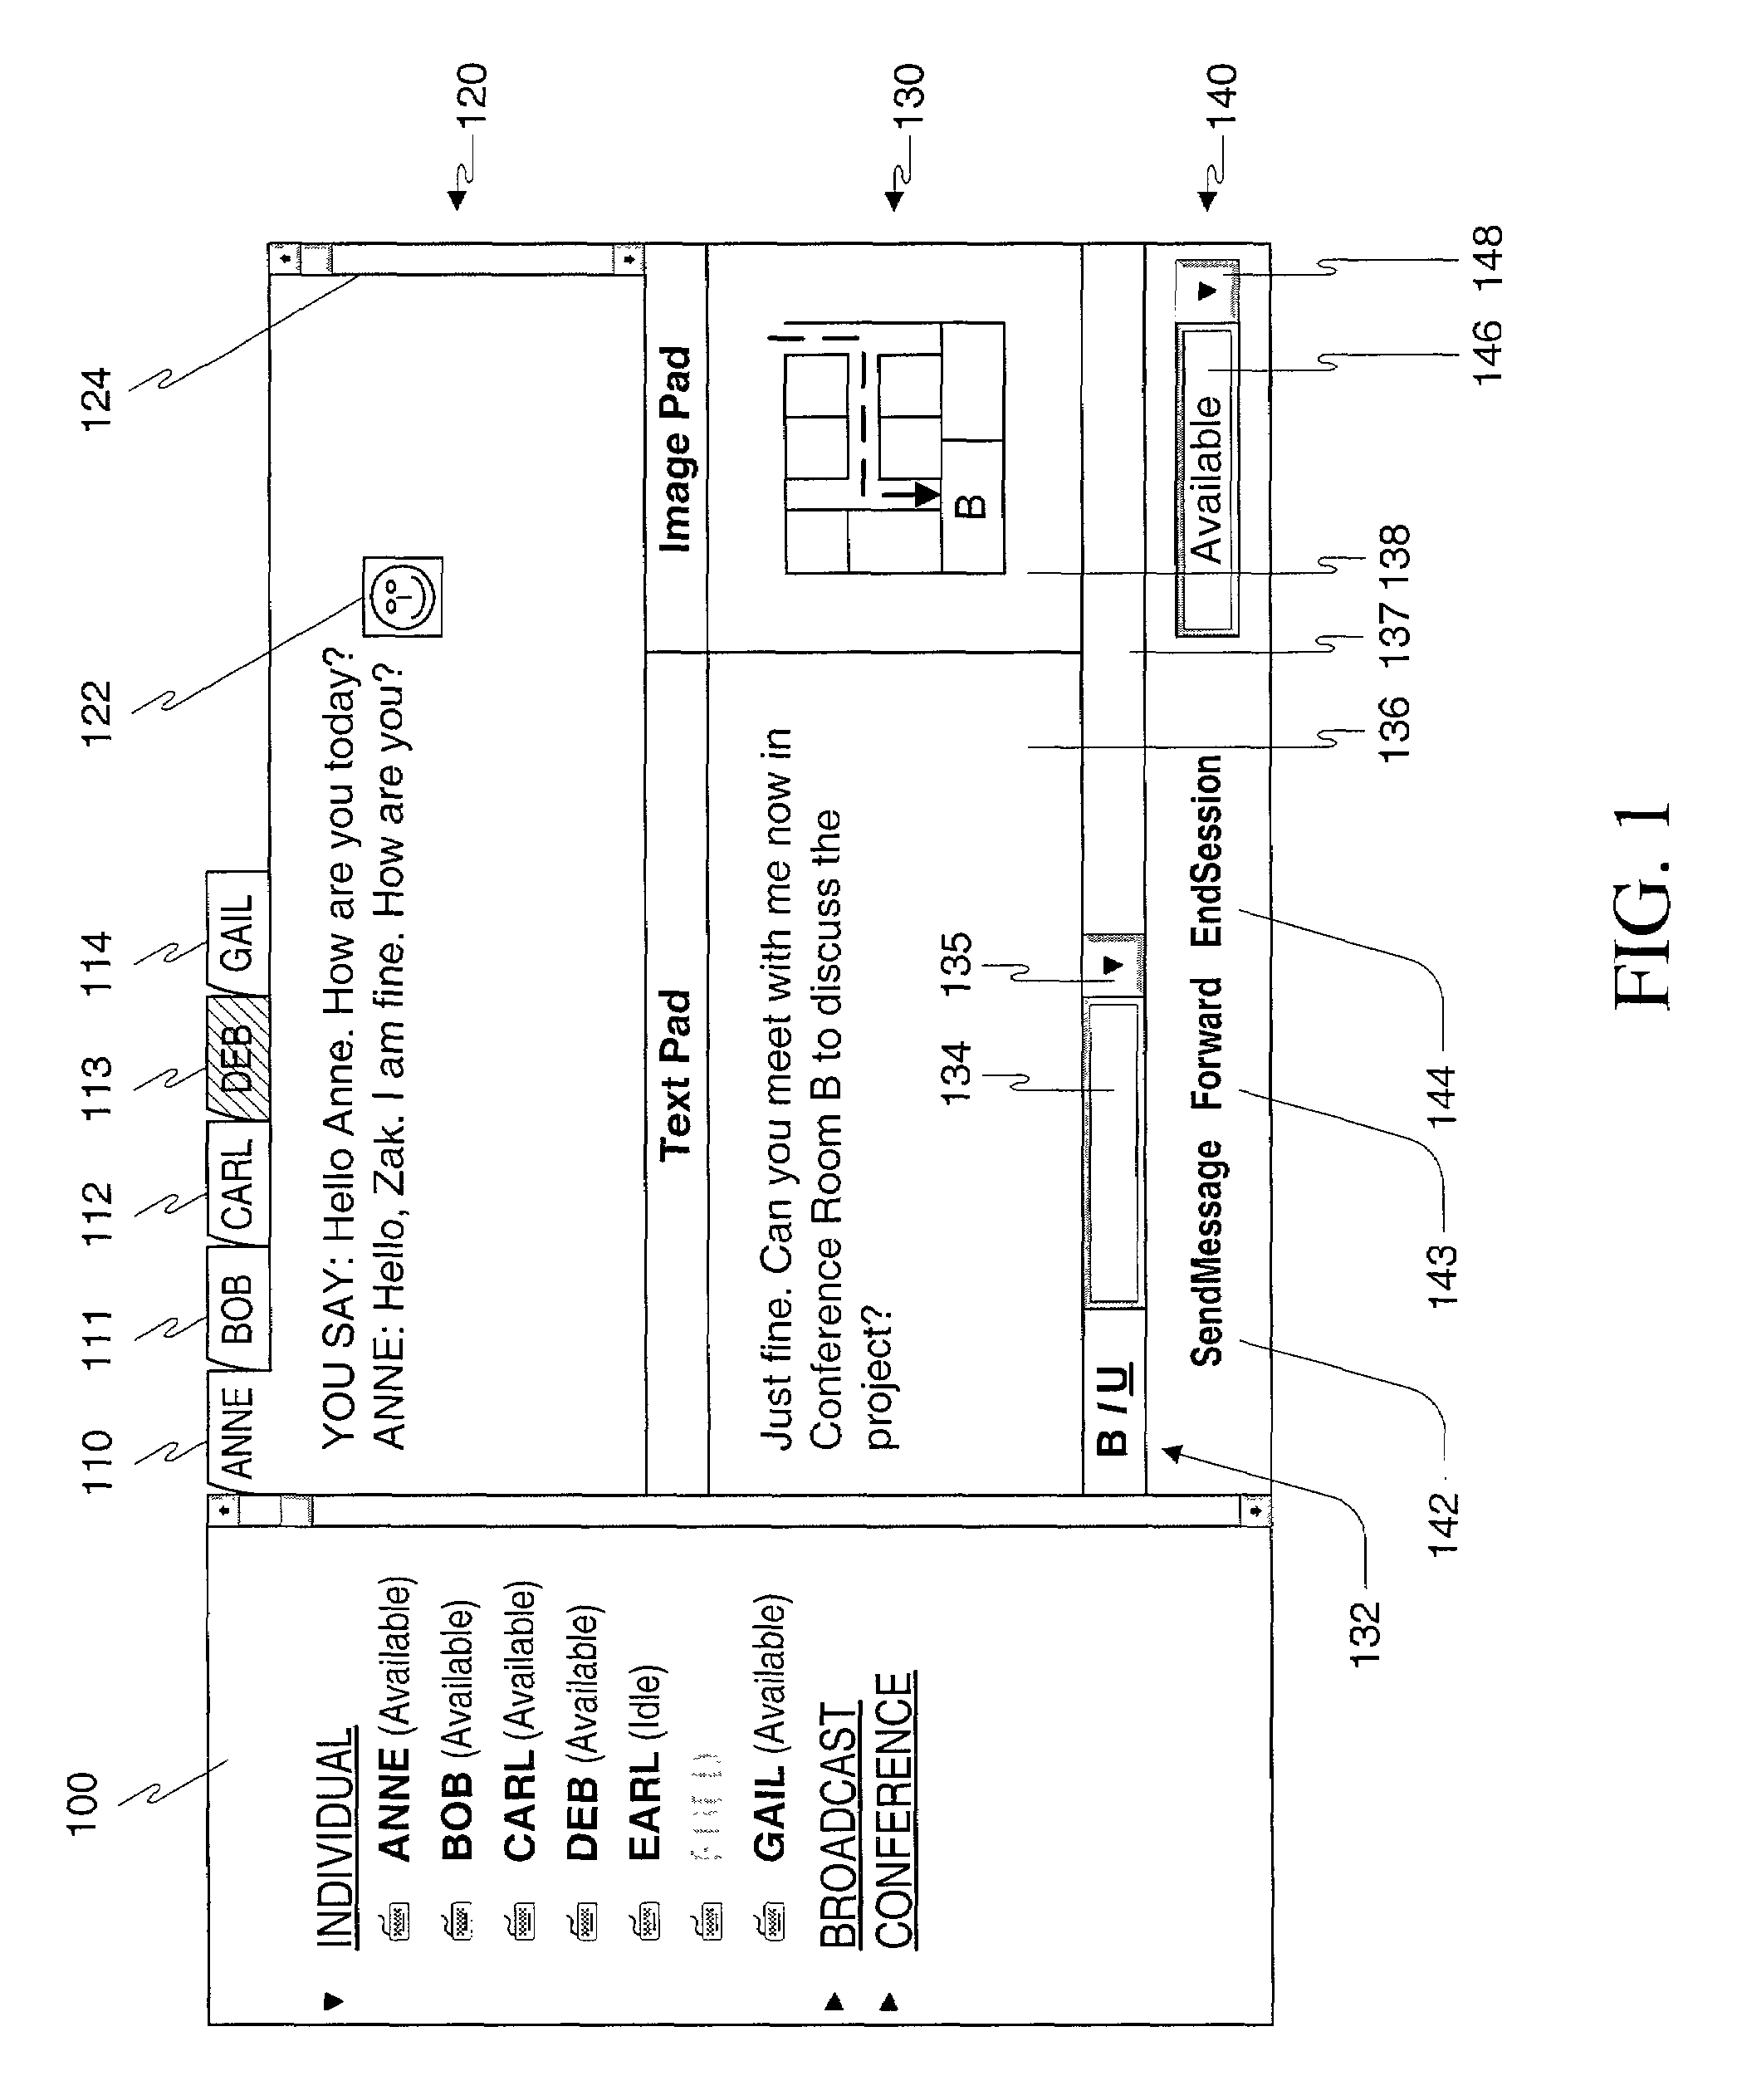 Method, apparatus and computer readable medium for multiple messaging session management with a graphical user interface